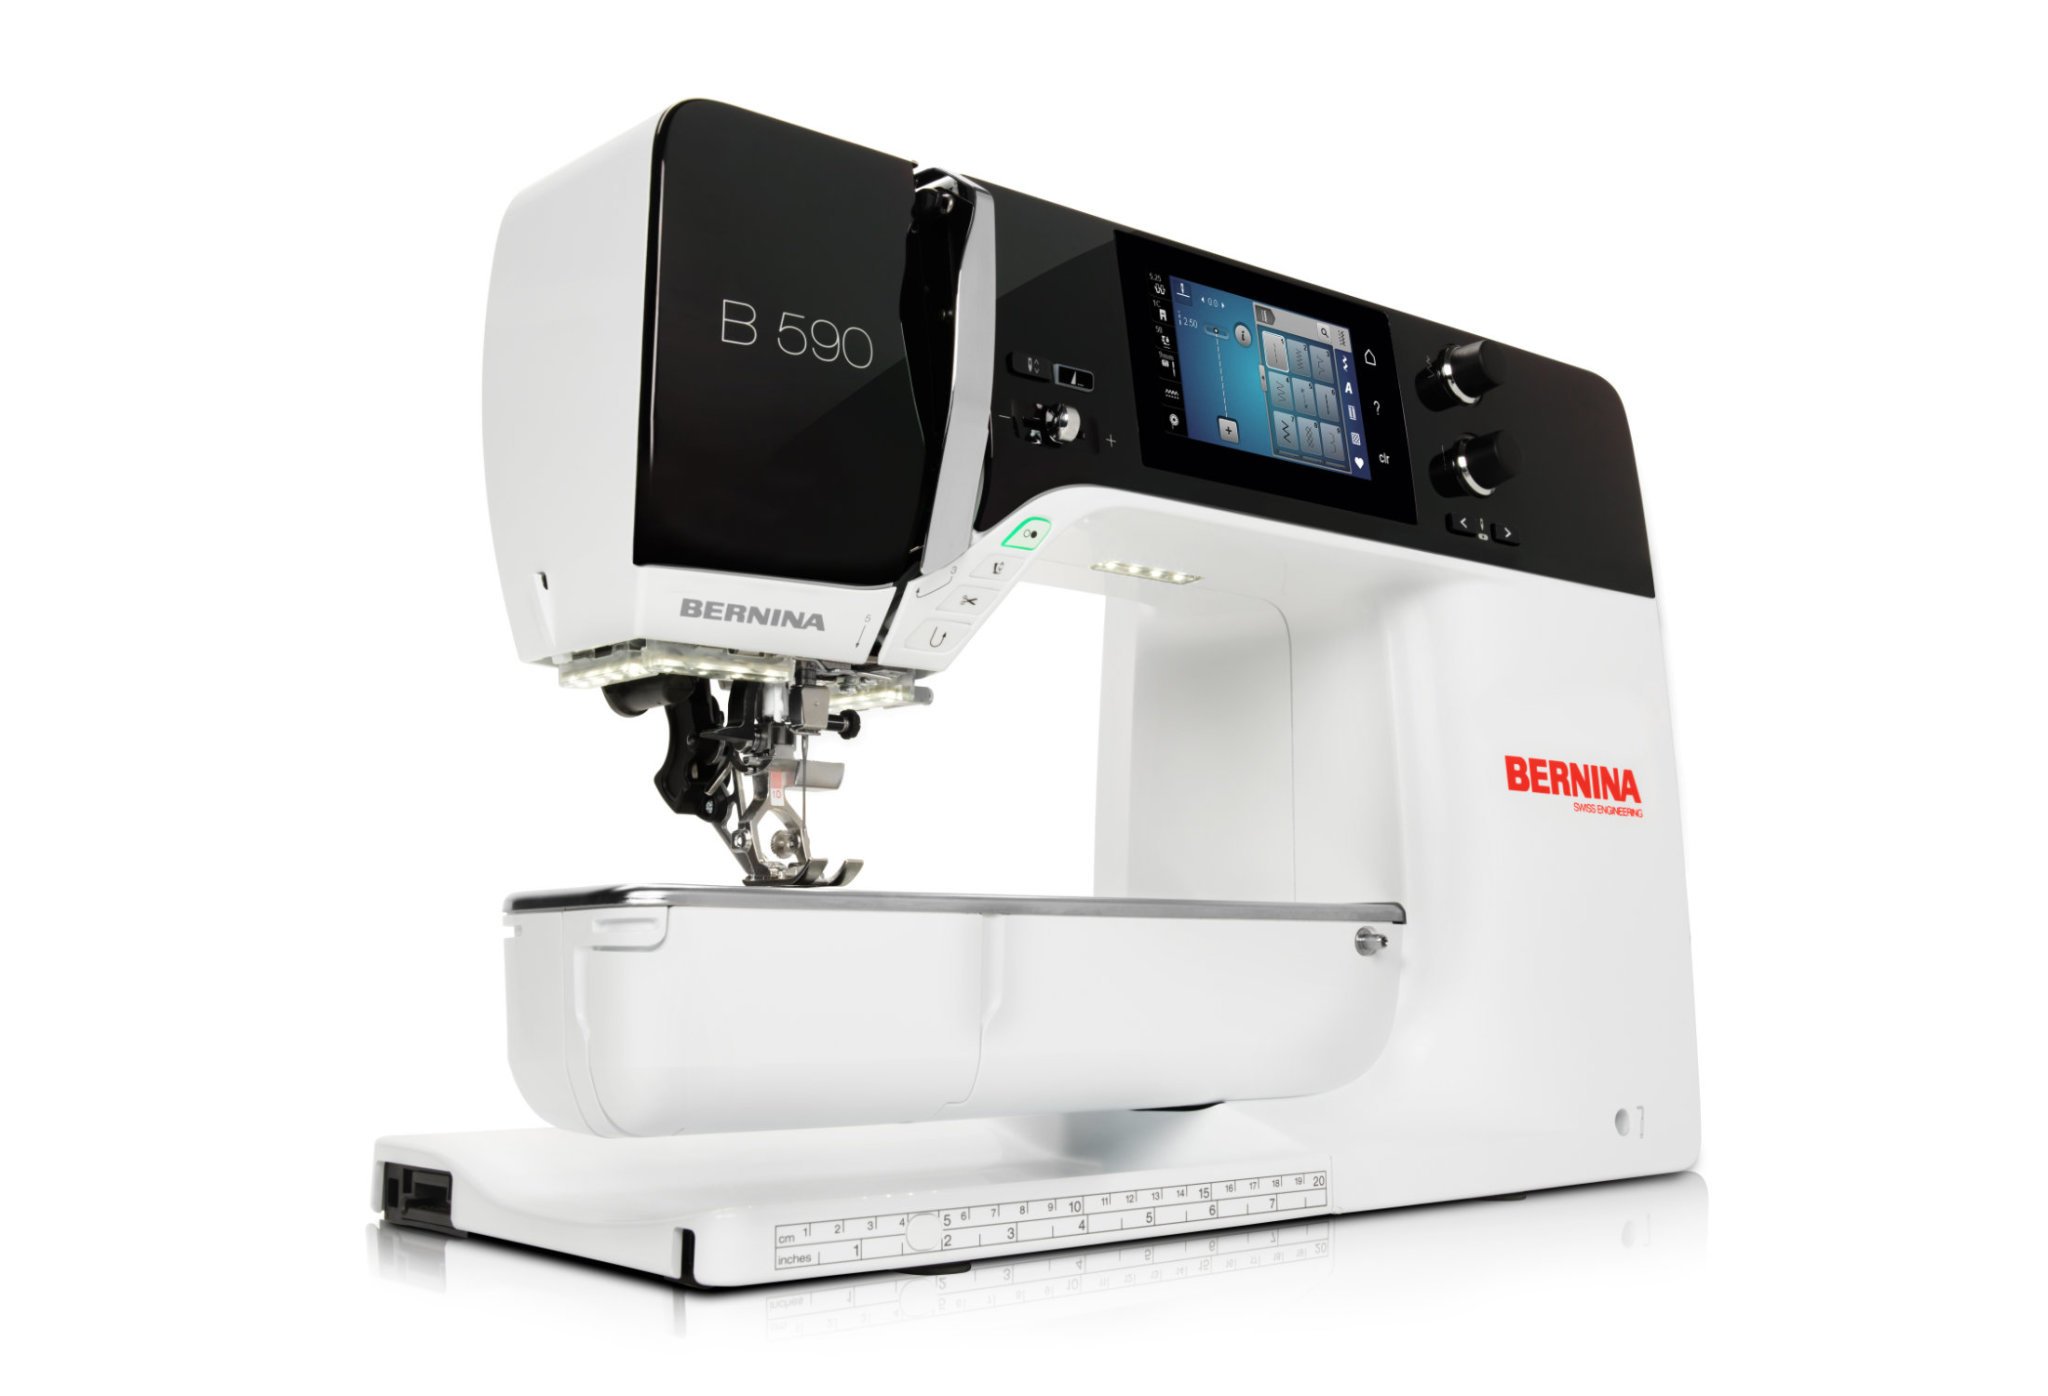 Bernina Bernina sewing and embroidery 590 with BSR